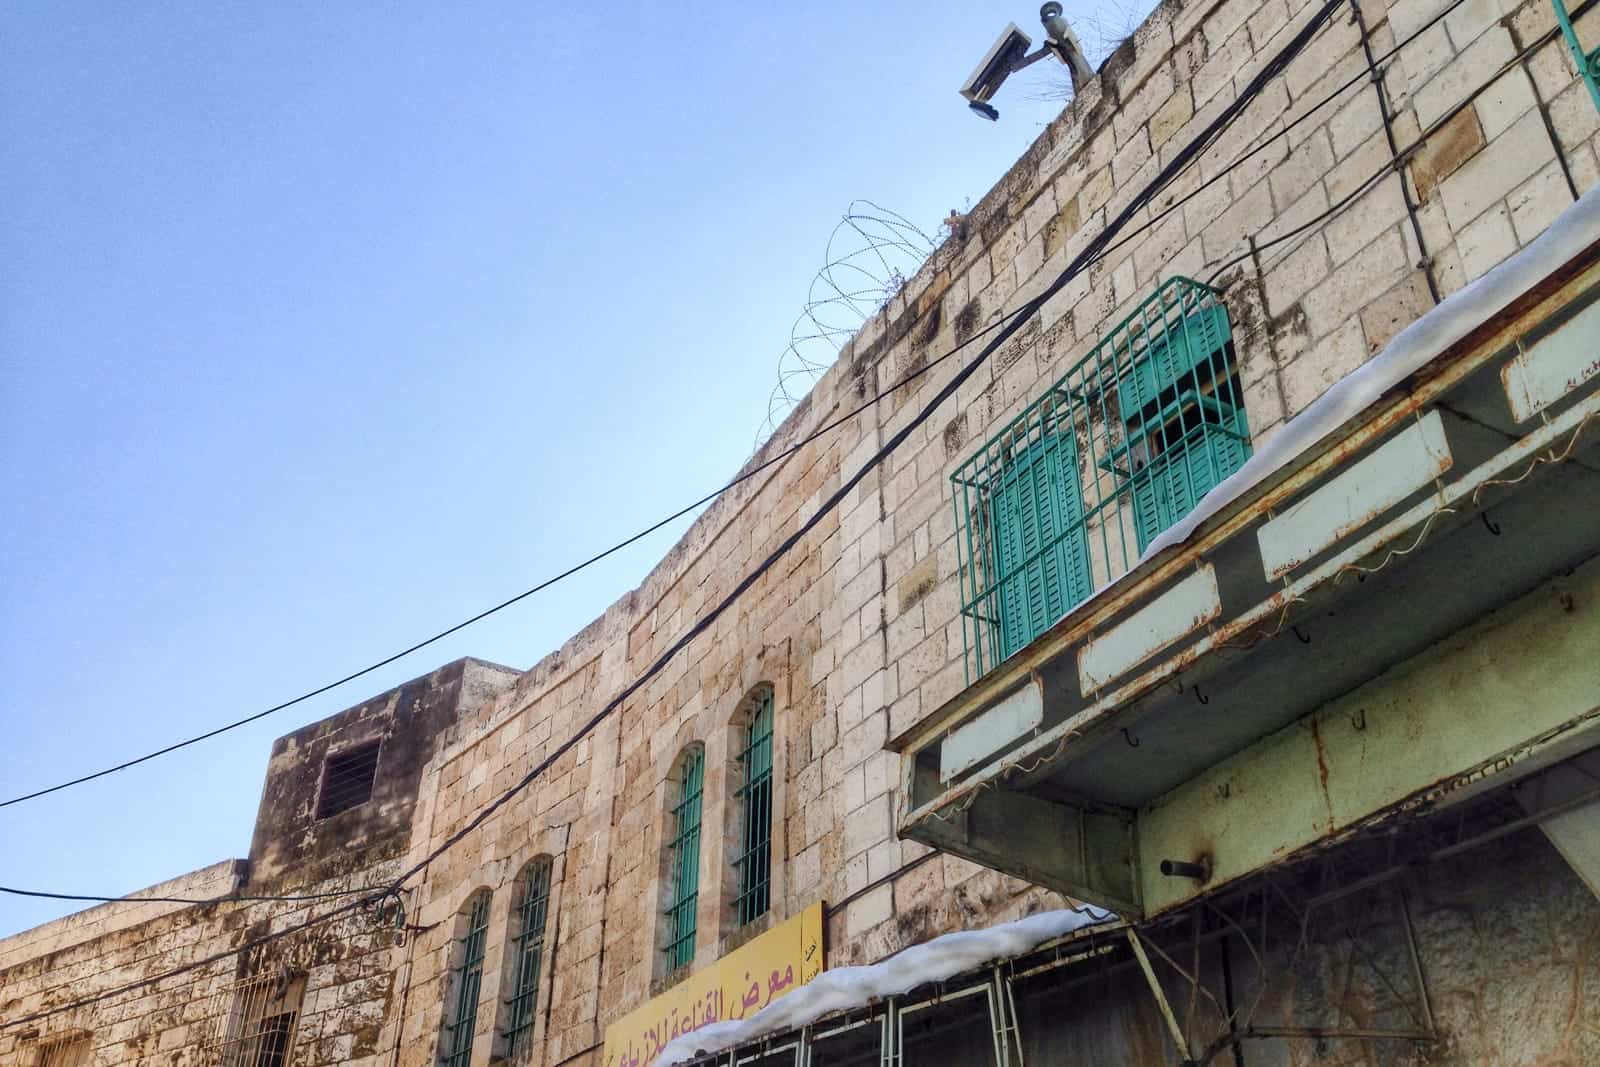 Security cameras of Jewish settlers overlooking Arab land in Hebron in the West Bank